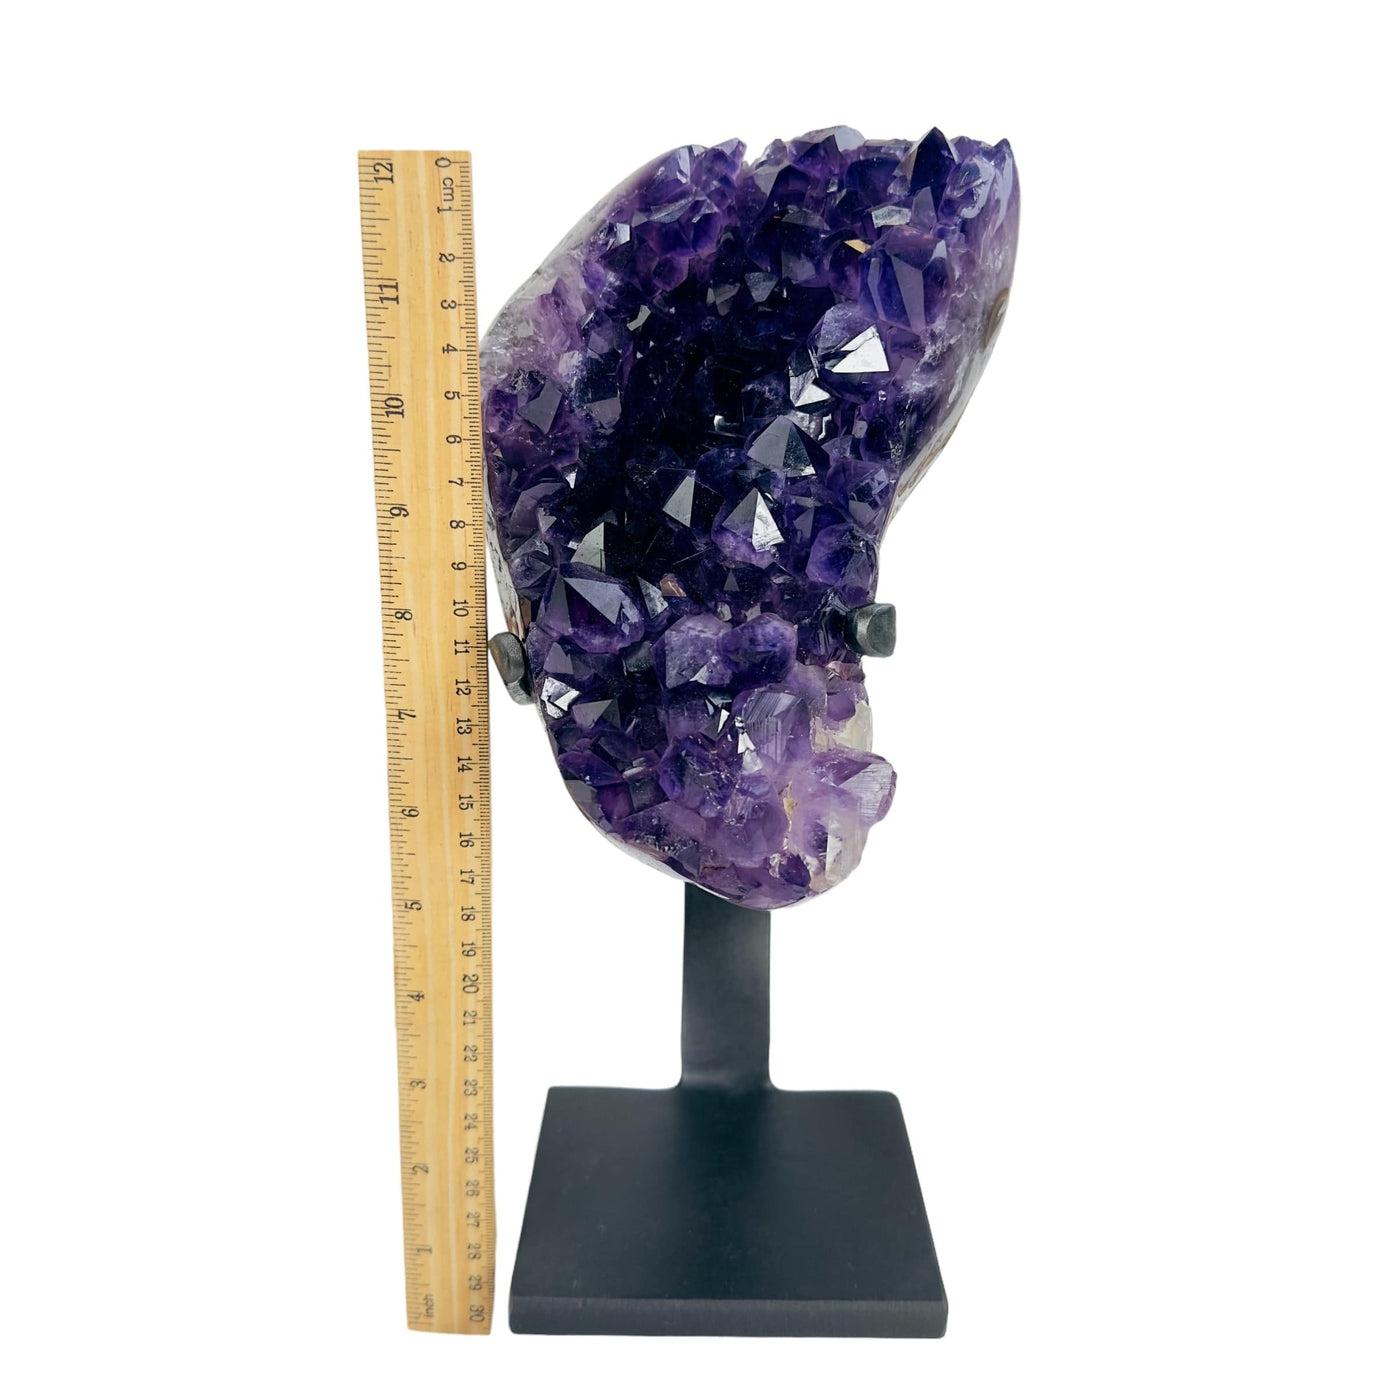 amethyst on stand next to a ruler for size reference